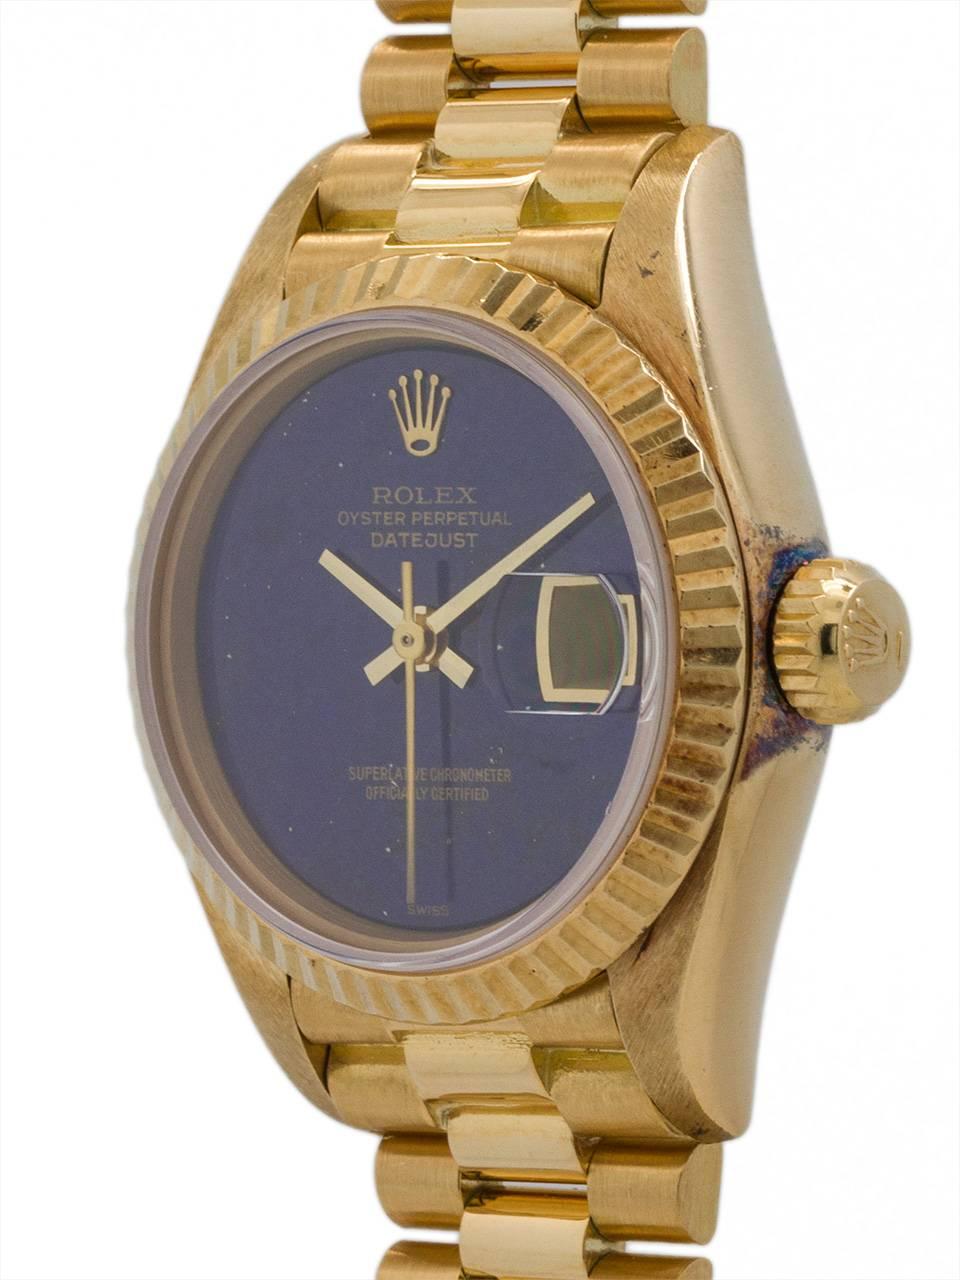 Exceptionally mint condition and stunning Rolex Lady President ref 69178 serial #8.4 million circa 1985. 27 x 33mm 18K yellow gold case with fluted bezel and sapphire crystal. Brilliant blue factory lapis lazuli stone dial with applied rolex logo